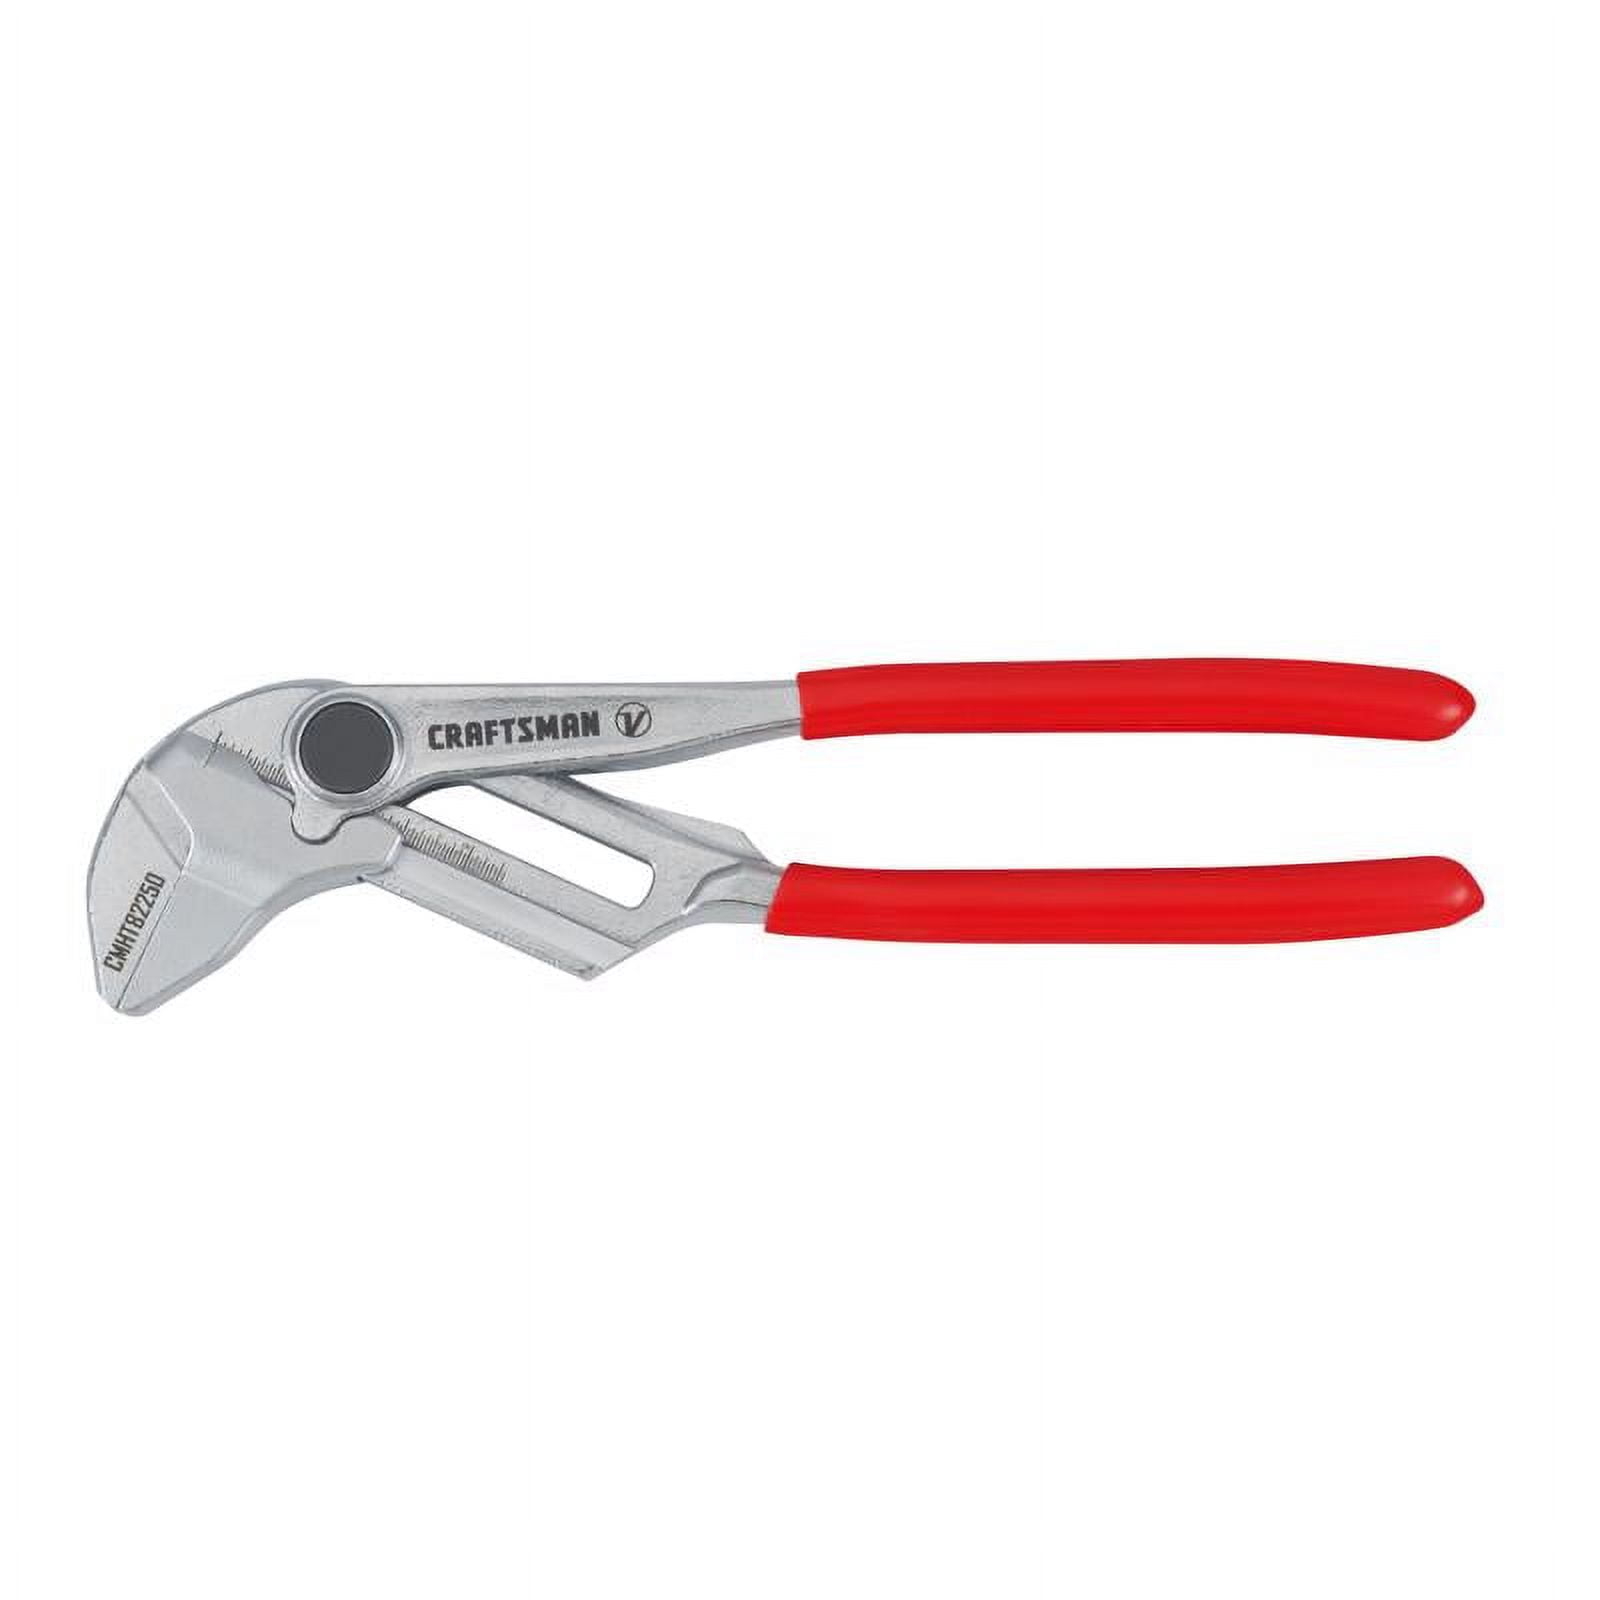 CRAFTSMAN V-SERIES Pliers Wrench, 10 Inch CMHT82250